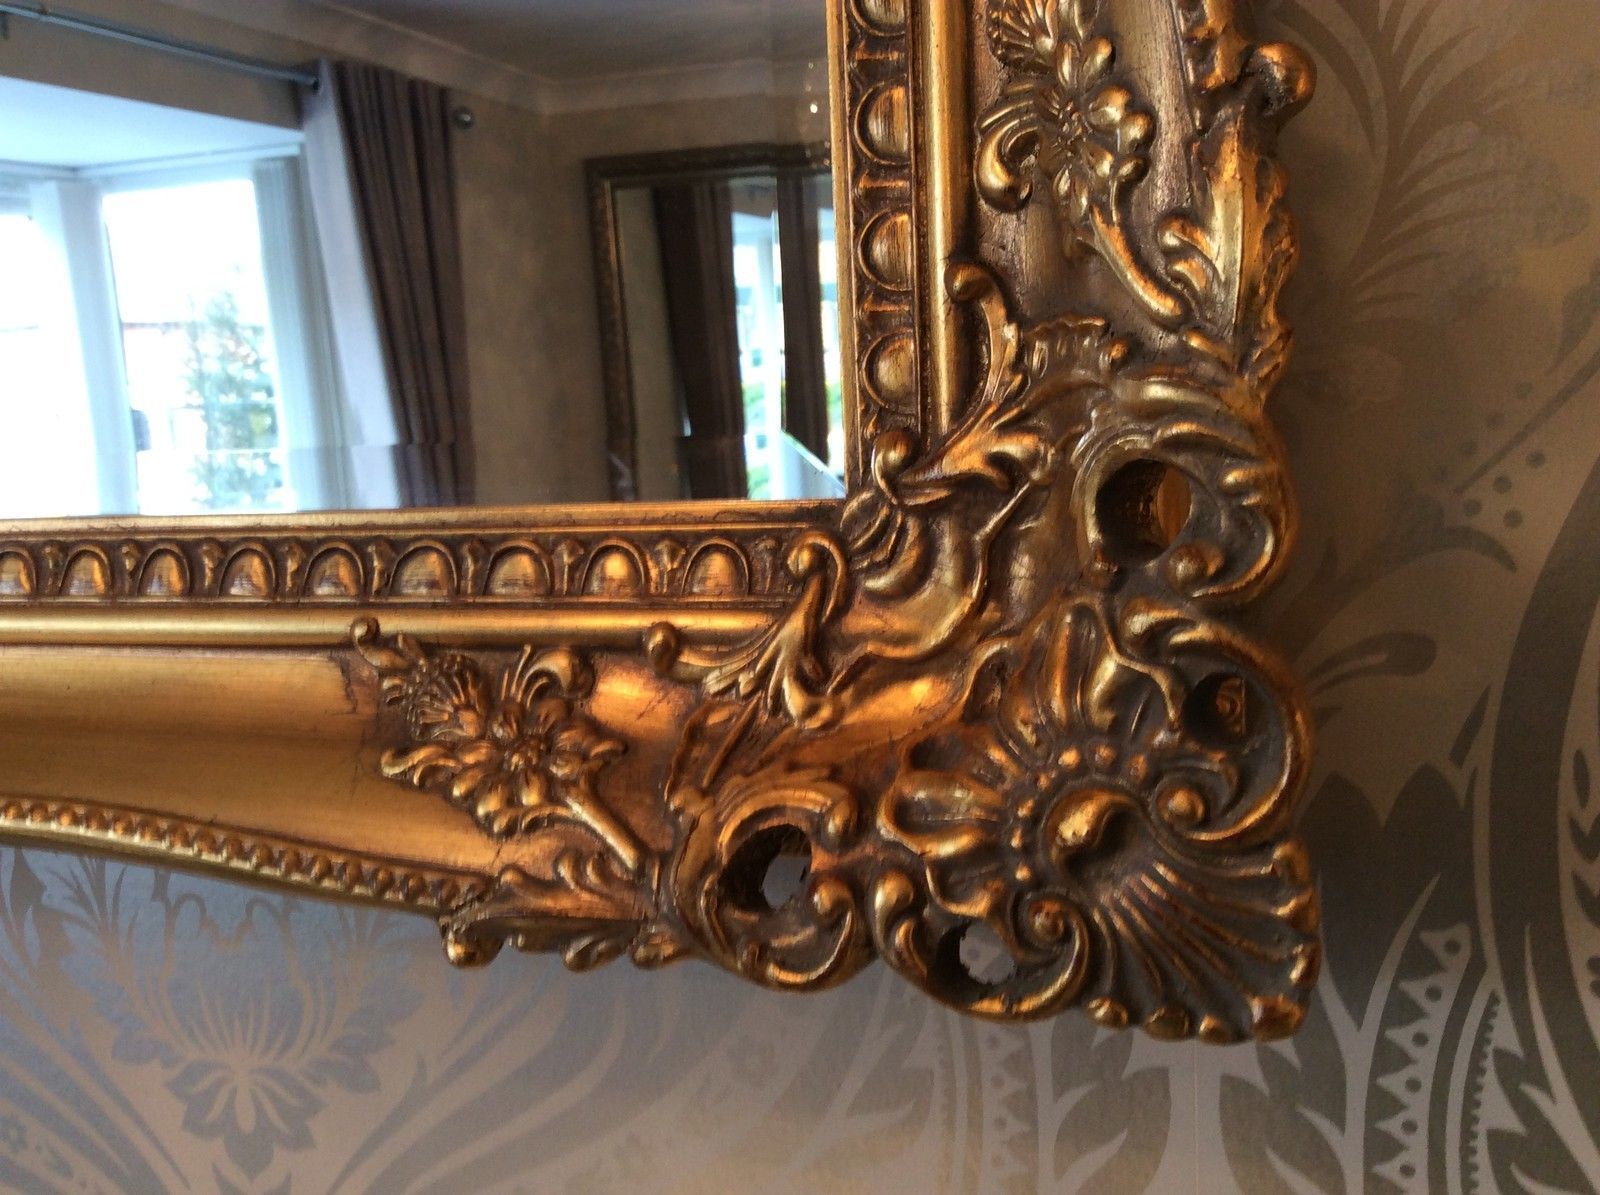 X Large Antique Gold Shabby Chic Ornate Decorative Wall Mirror Free Postage In Most Popular Gold Metal Mirrored Wall Art (View 13 of 20)